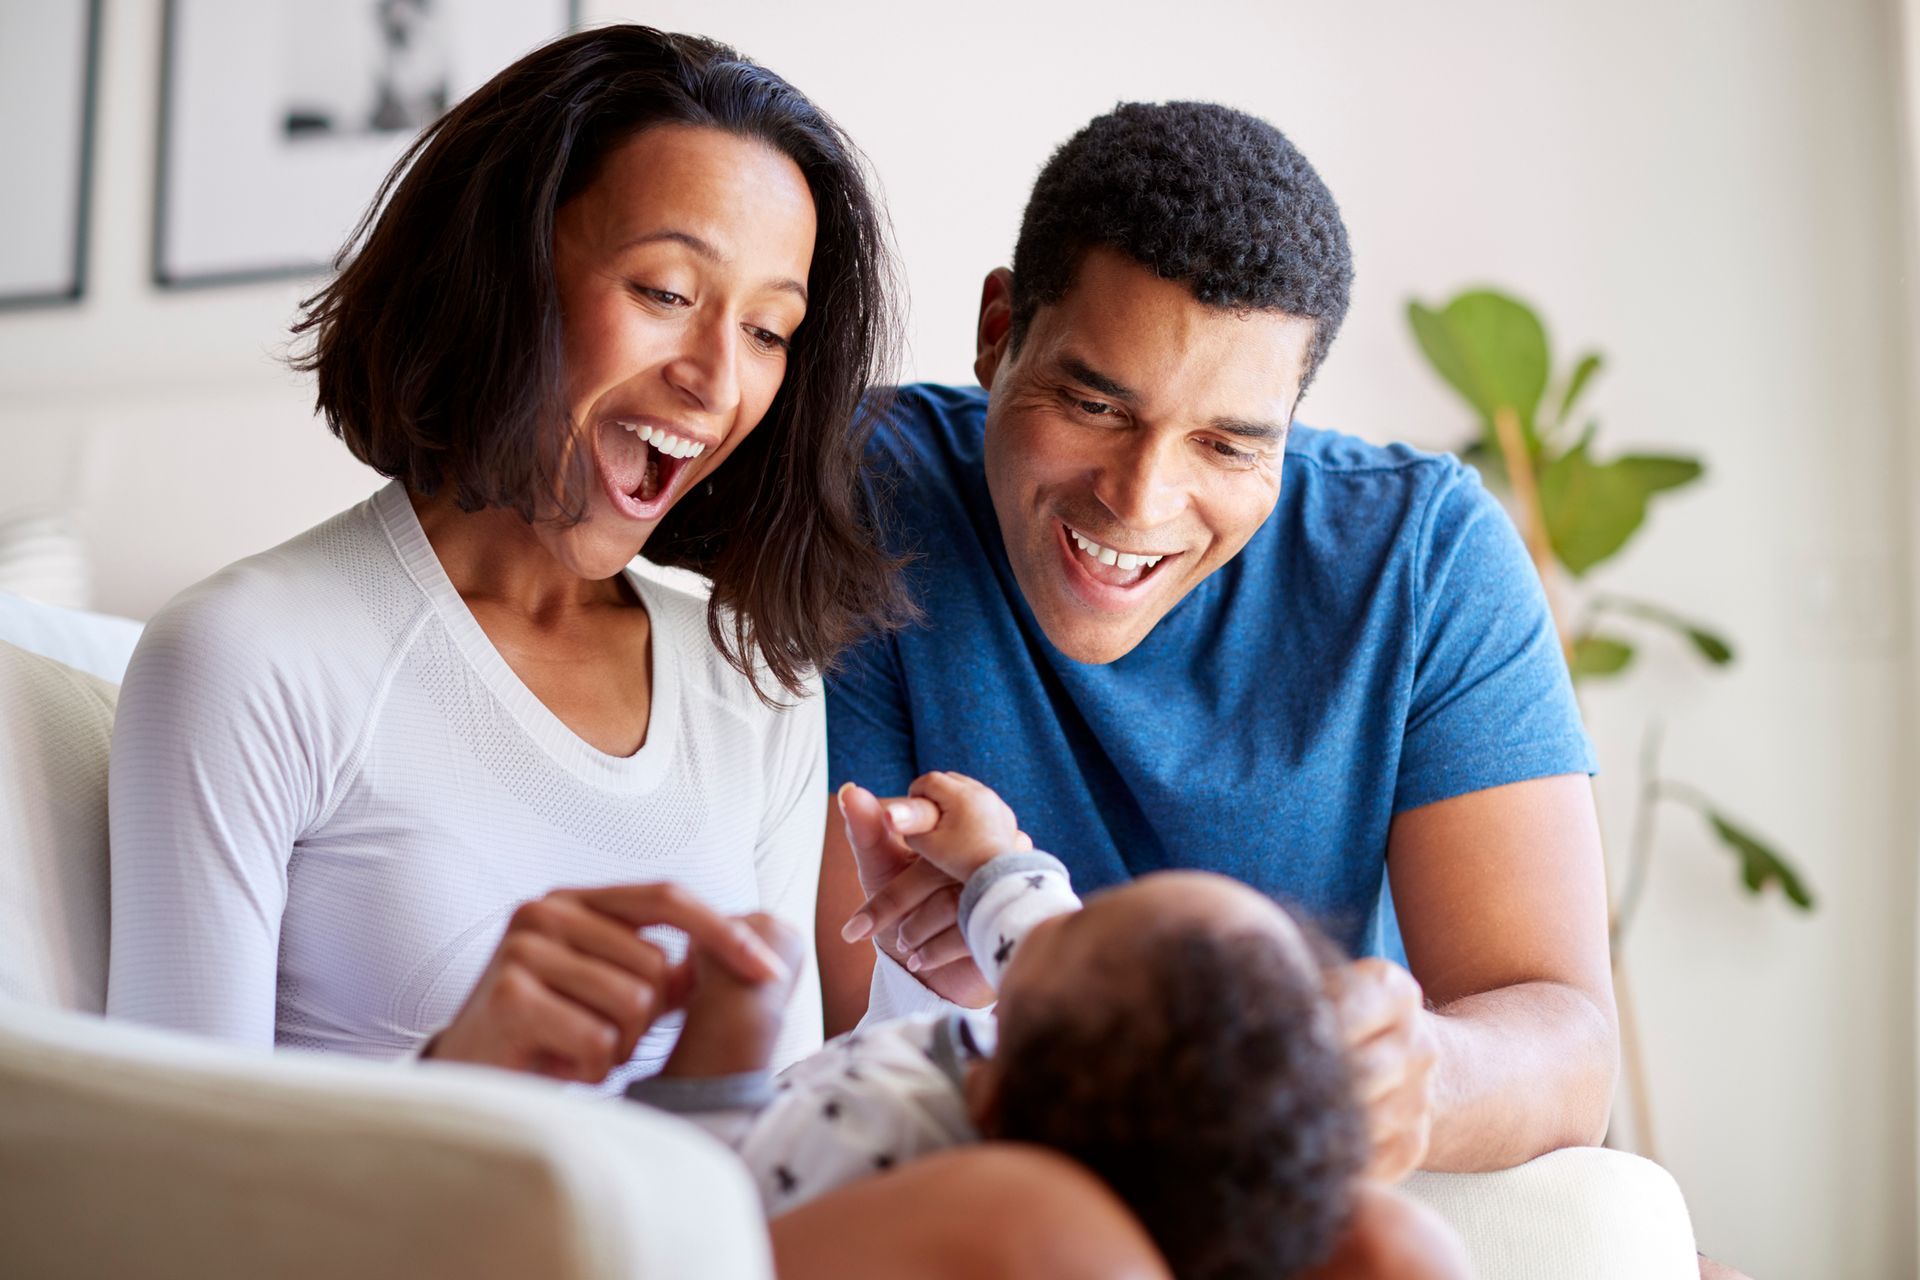 A man and woman are sitting on a couch playing with a baby.